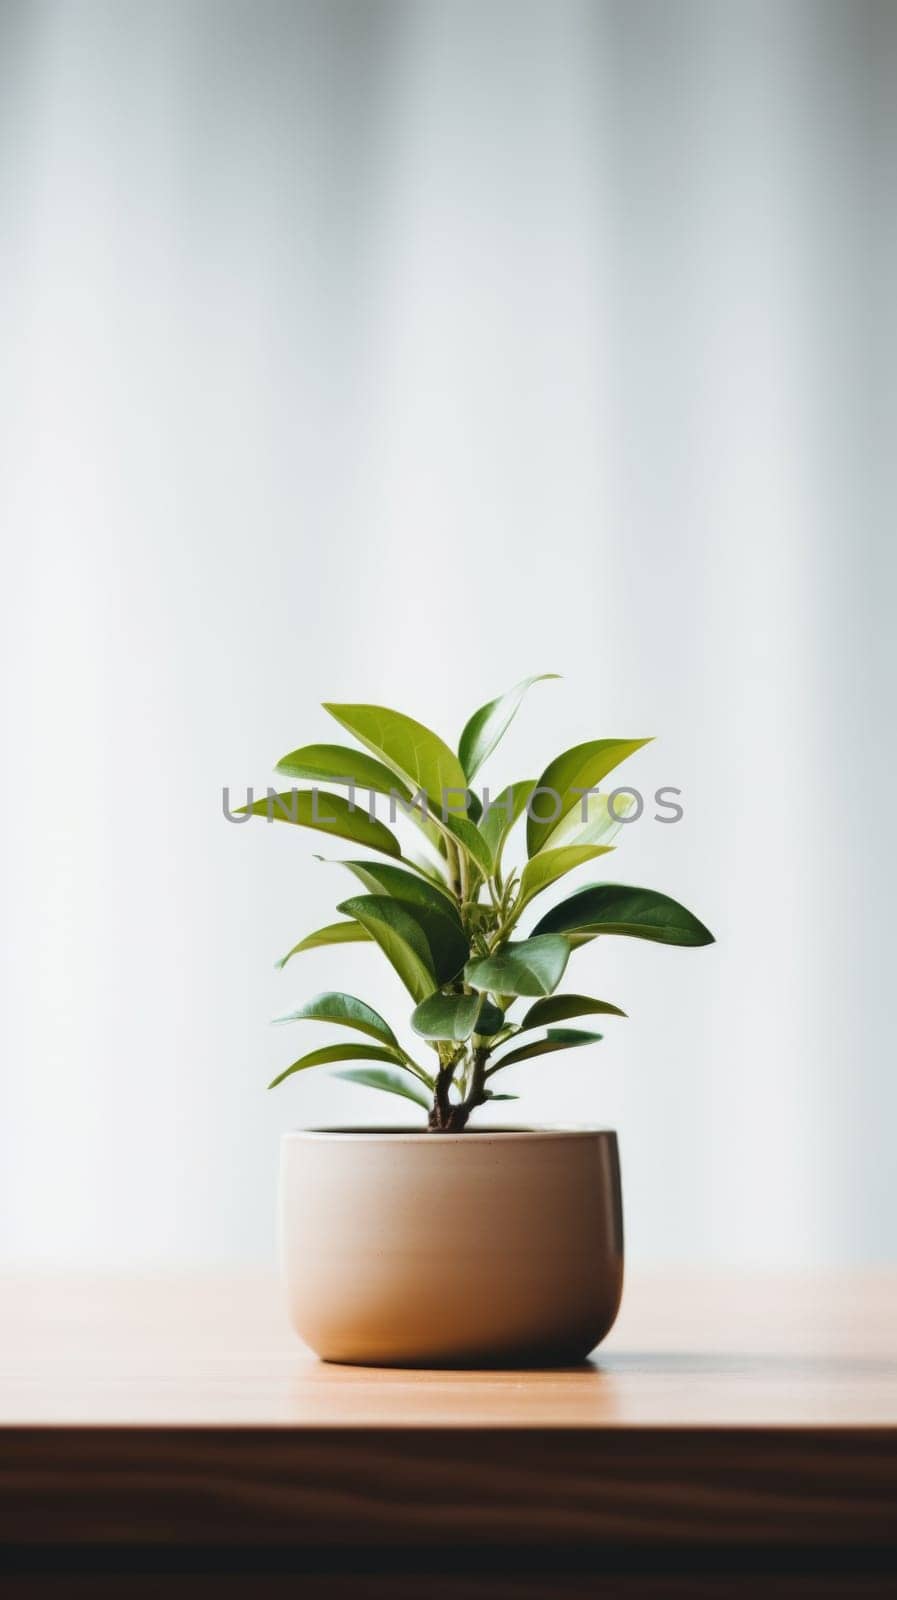 A small plant in a ceramic pot on a table, AI by starush